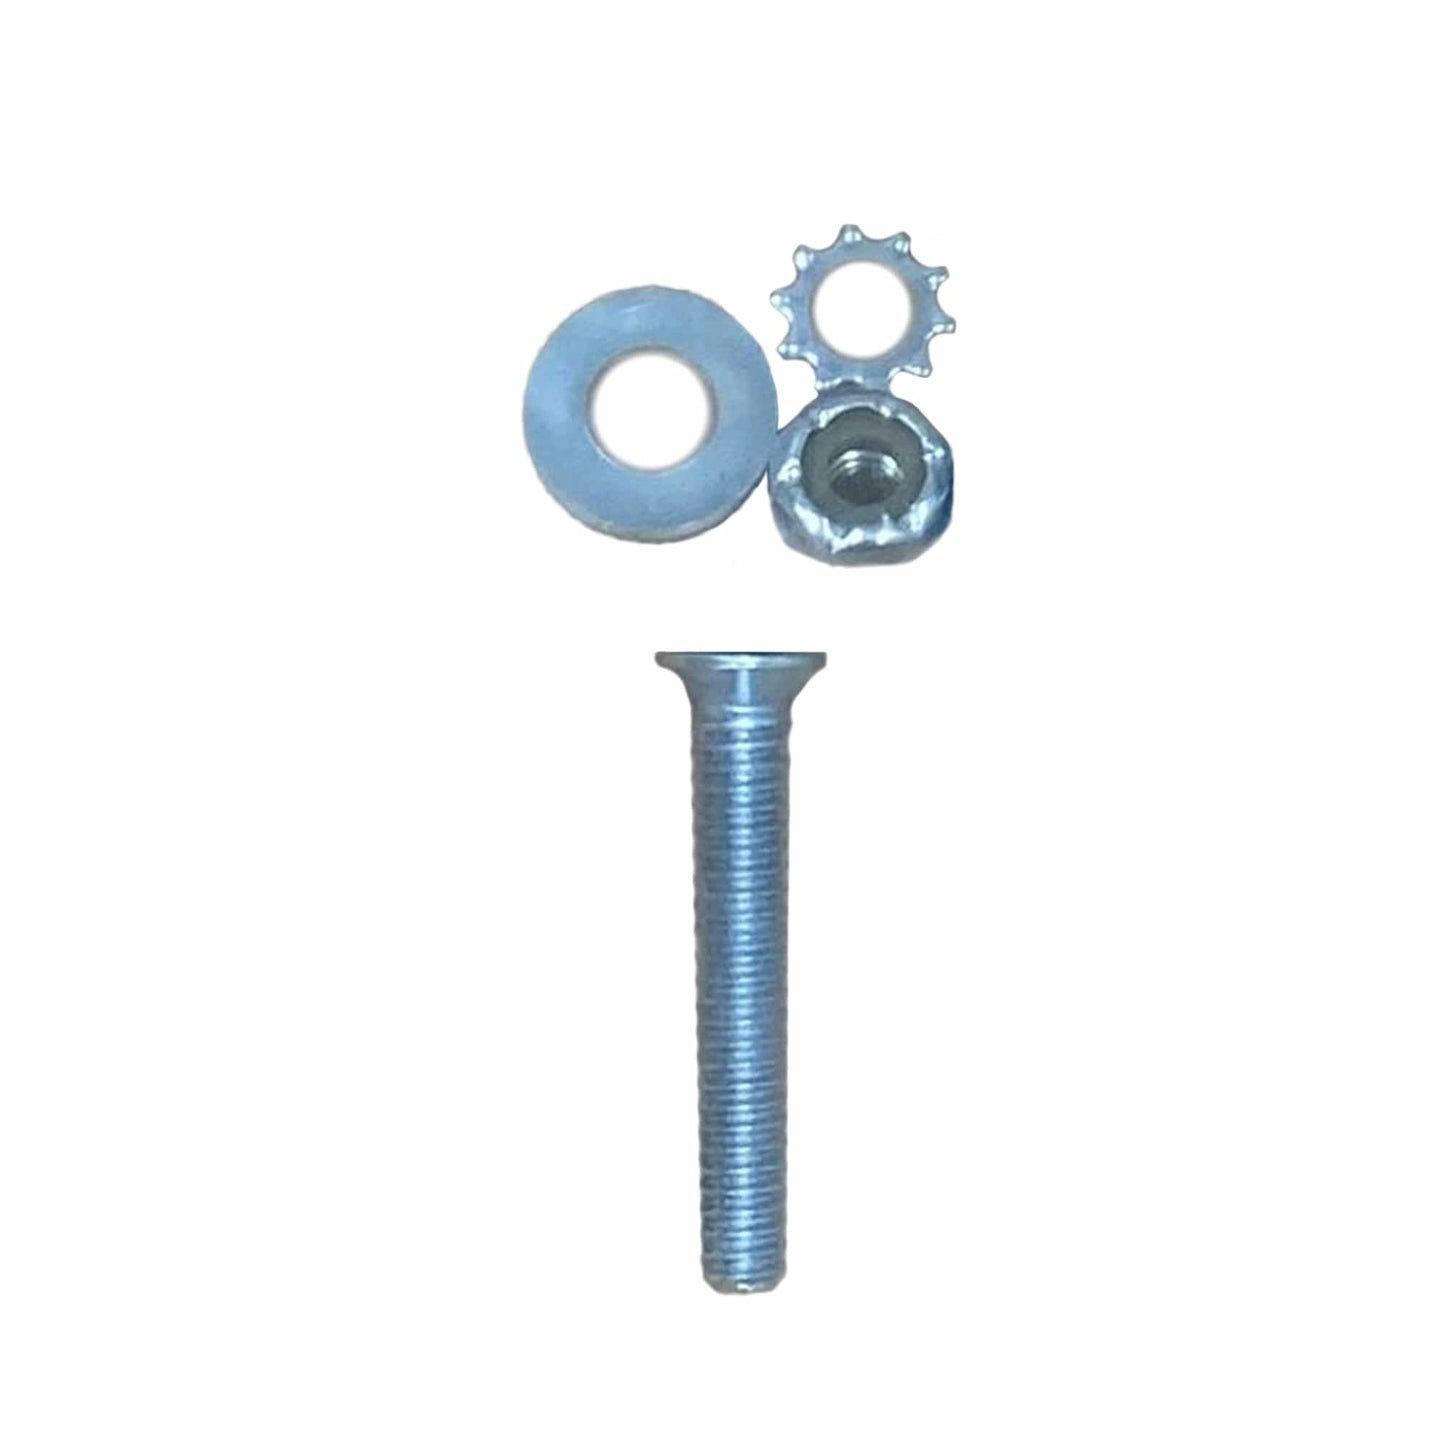 DW Screw, Nut, & Washers for 5000 Hi-Hat Stand Chain (2 Pack Bundle) Drums and Percussion / Parts and Accessories / Drum Parts